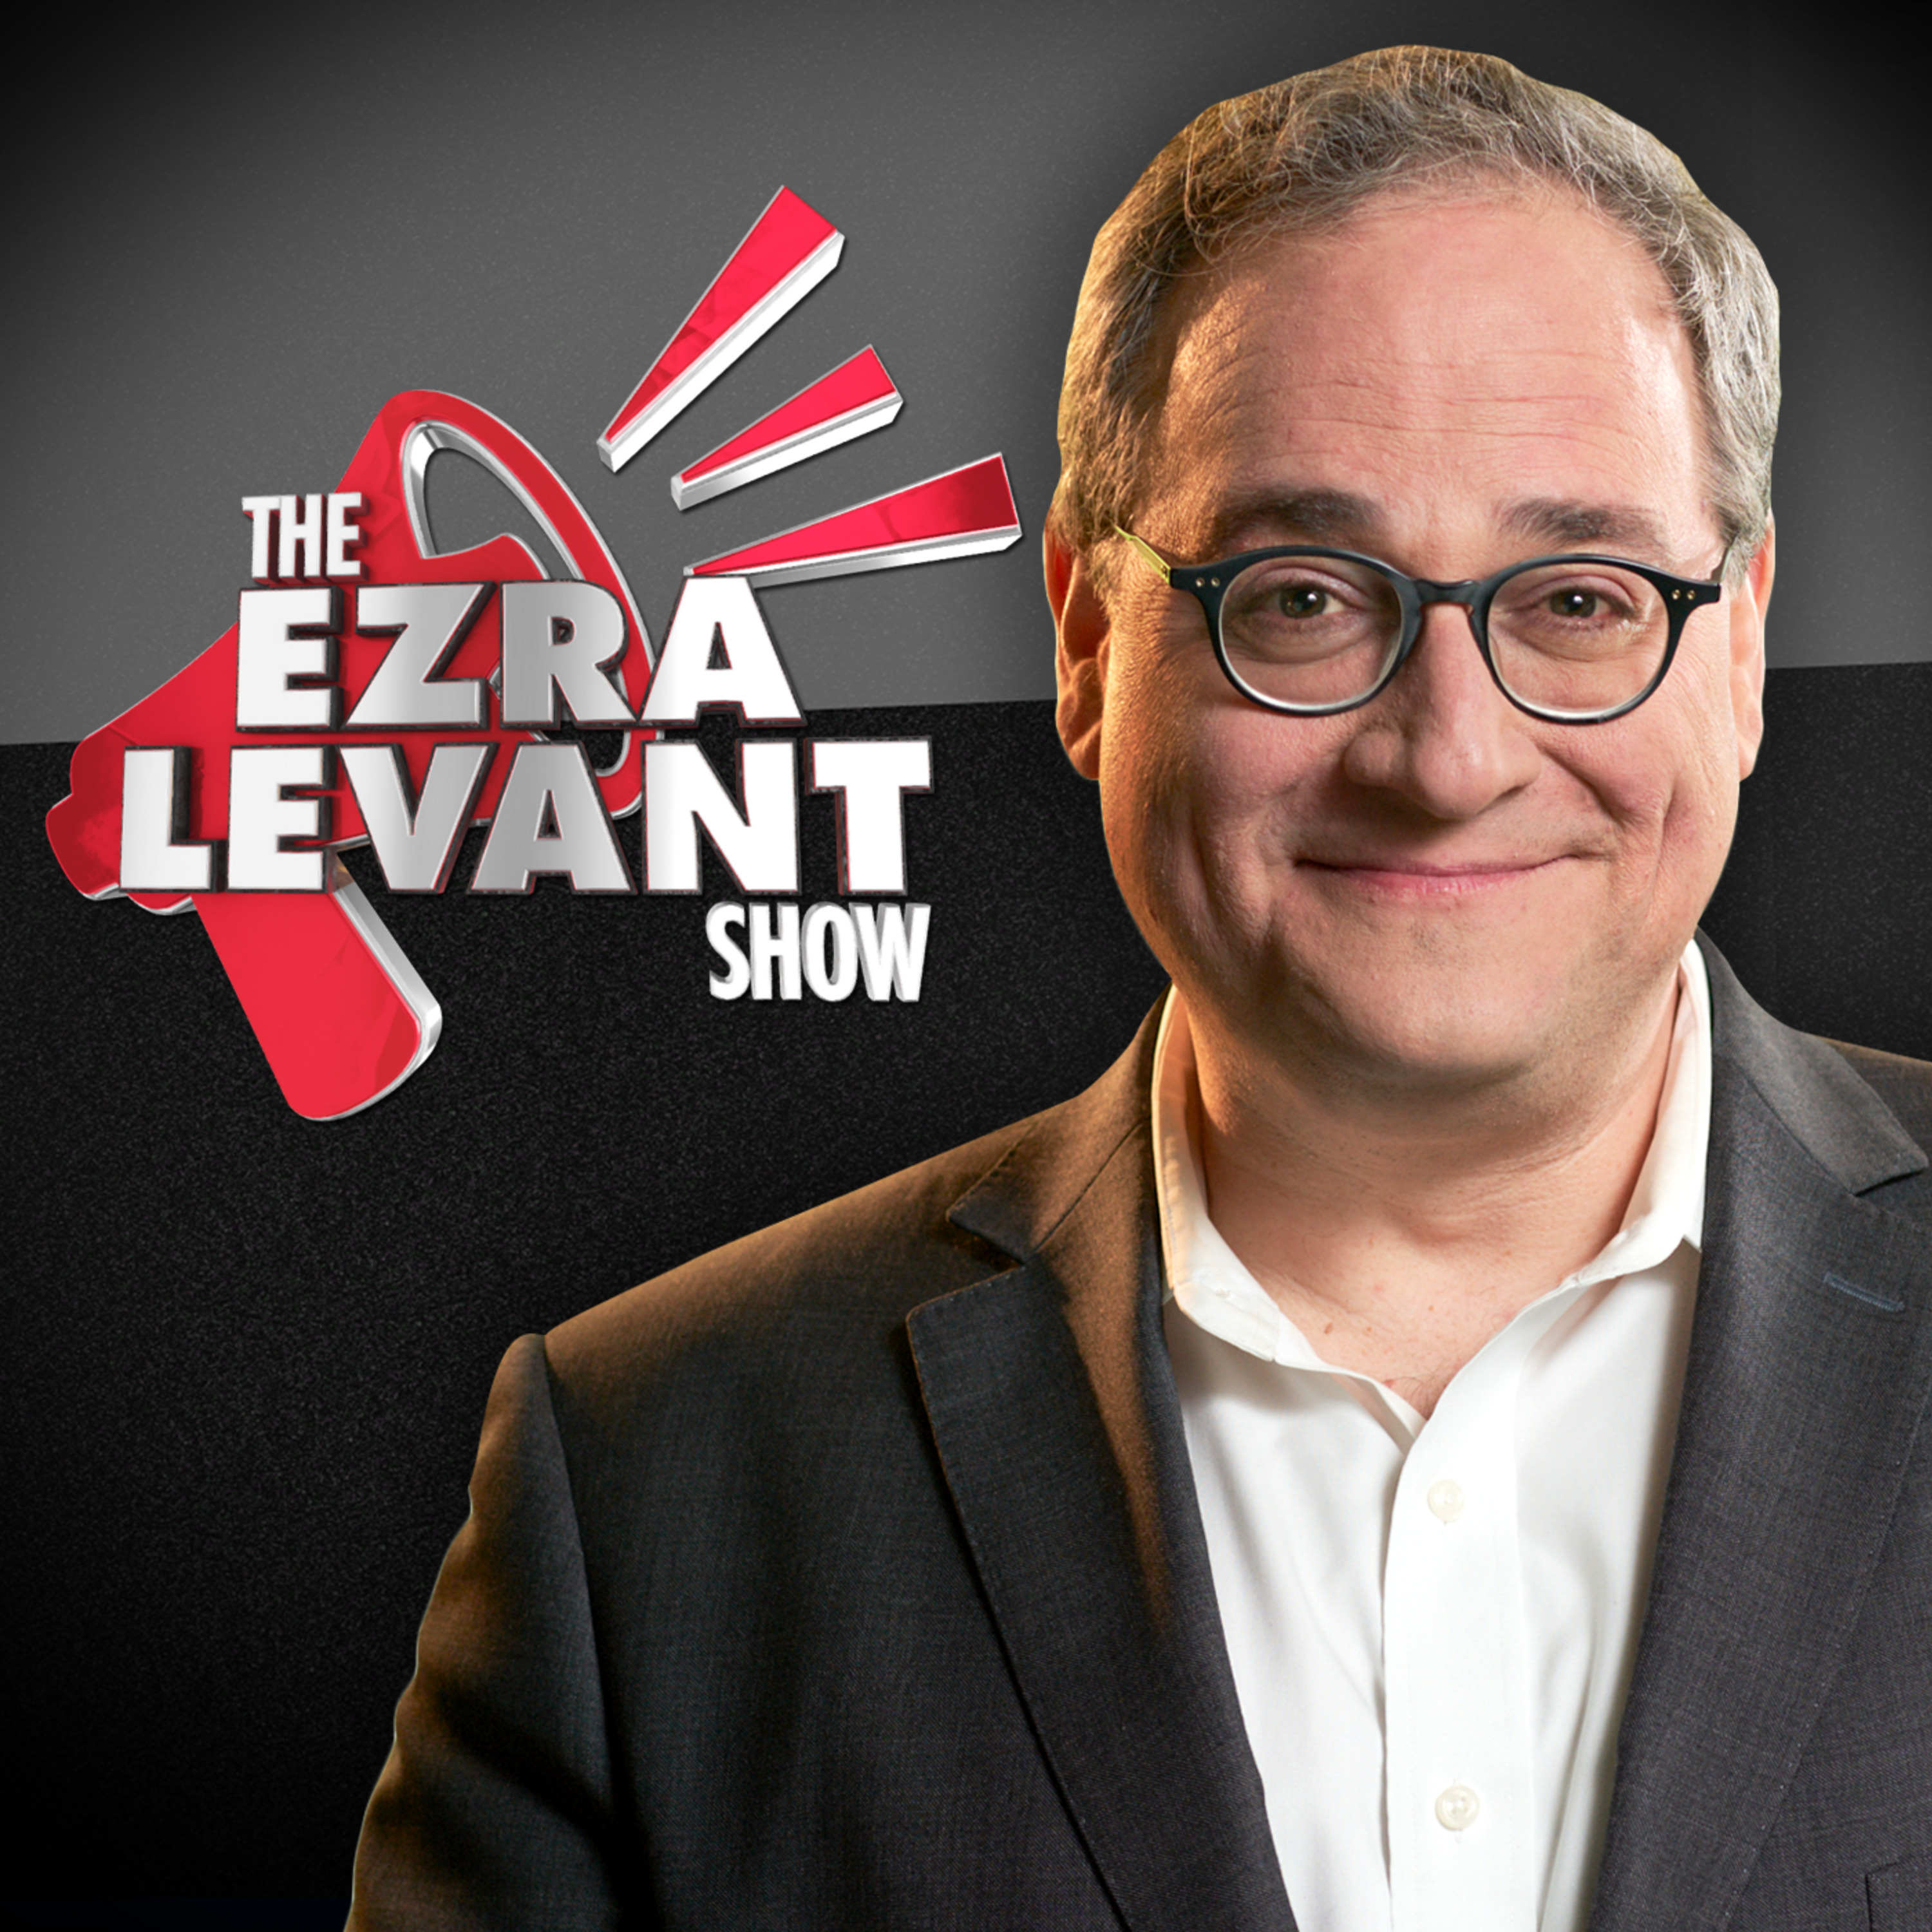 EZRA LEVANT | Breaking the mold on foreign policy: An interview with Maxime Bernier